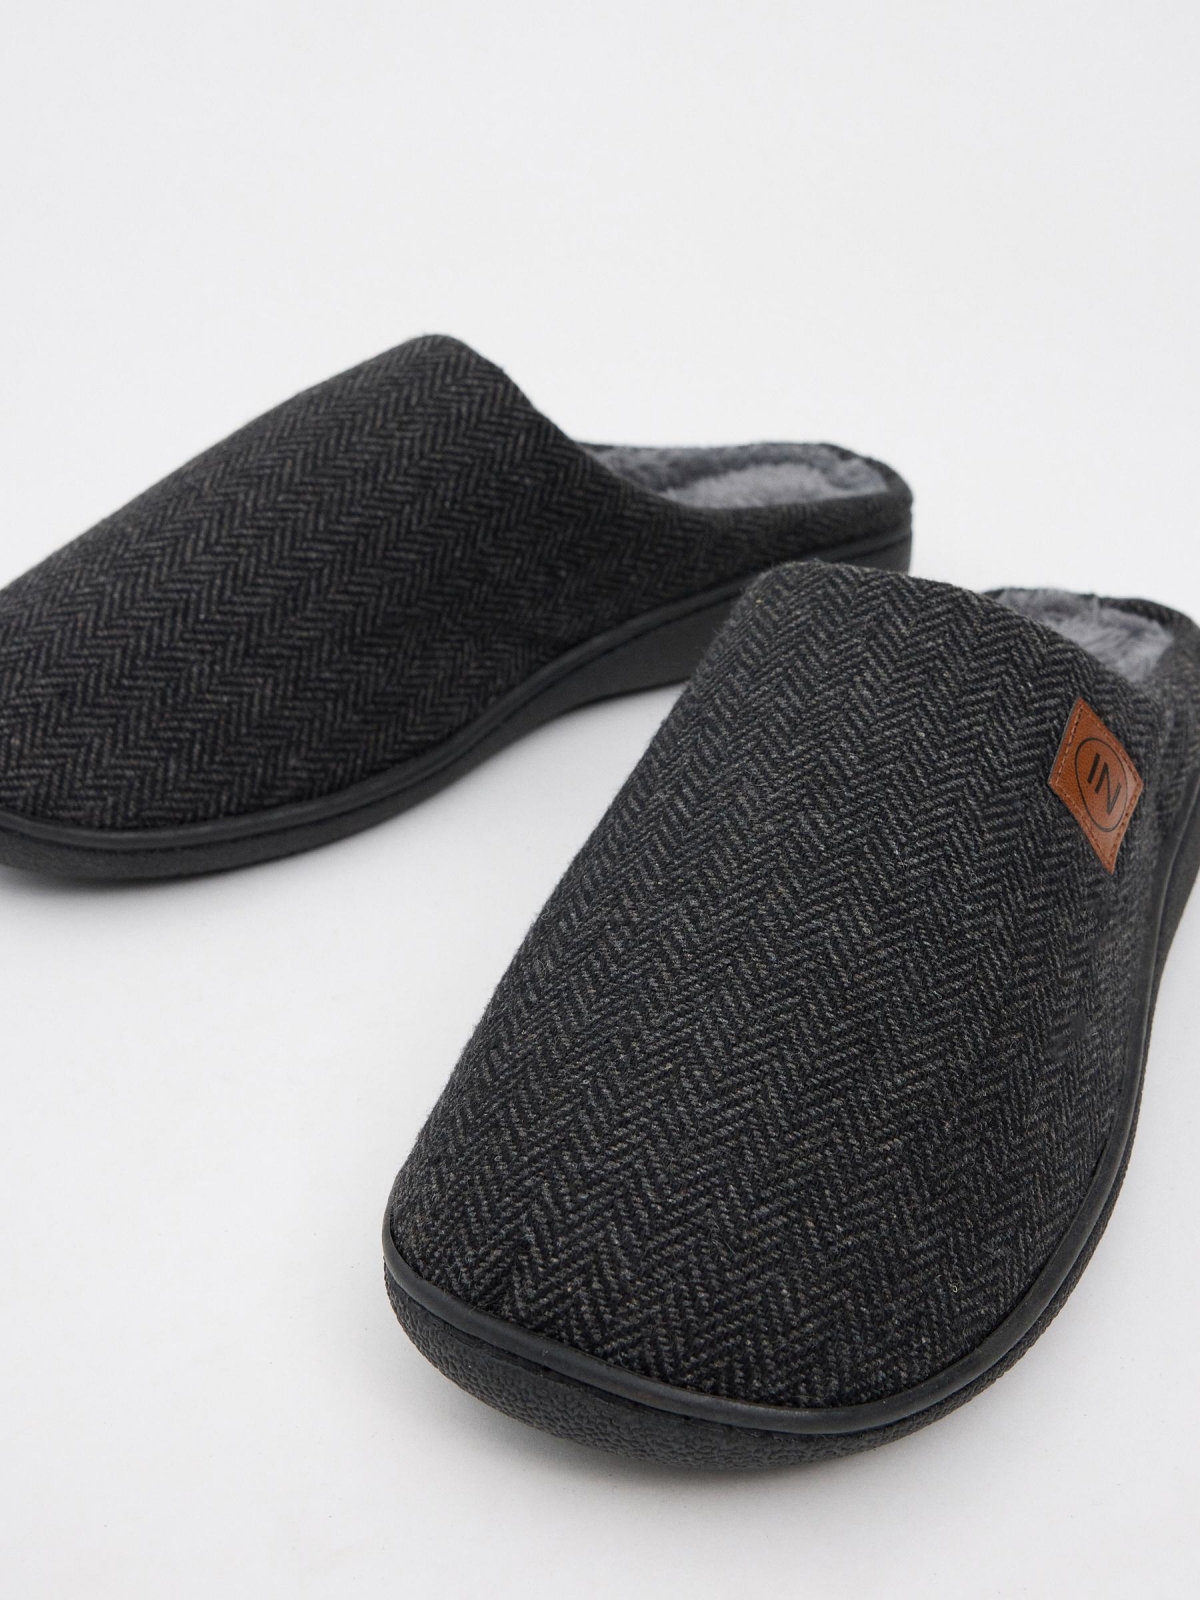 Fur lined home slippers dark grey detail view